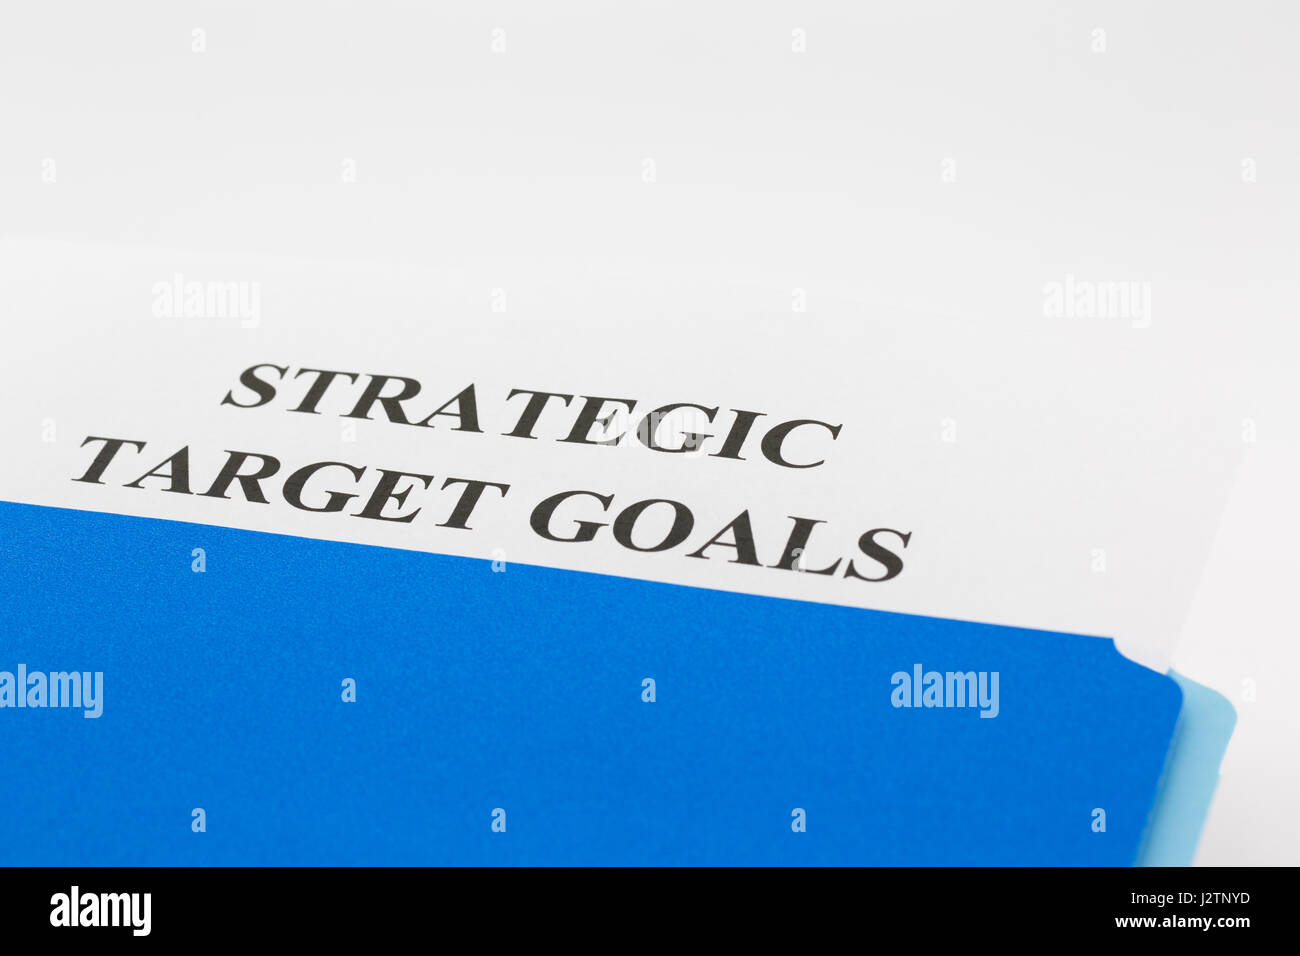 Blue file folder with Strategic Target Goals report cover slipped out.  Horizontal photograph with copy space. Stock Photo